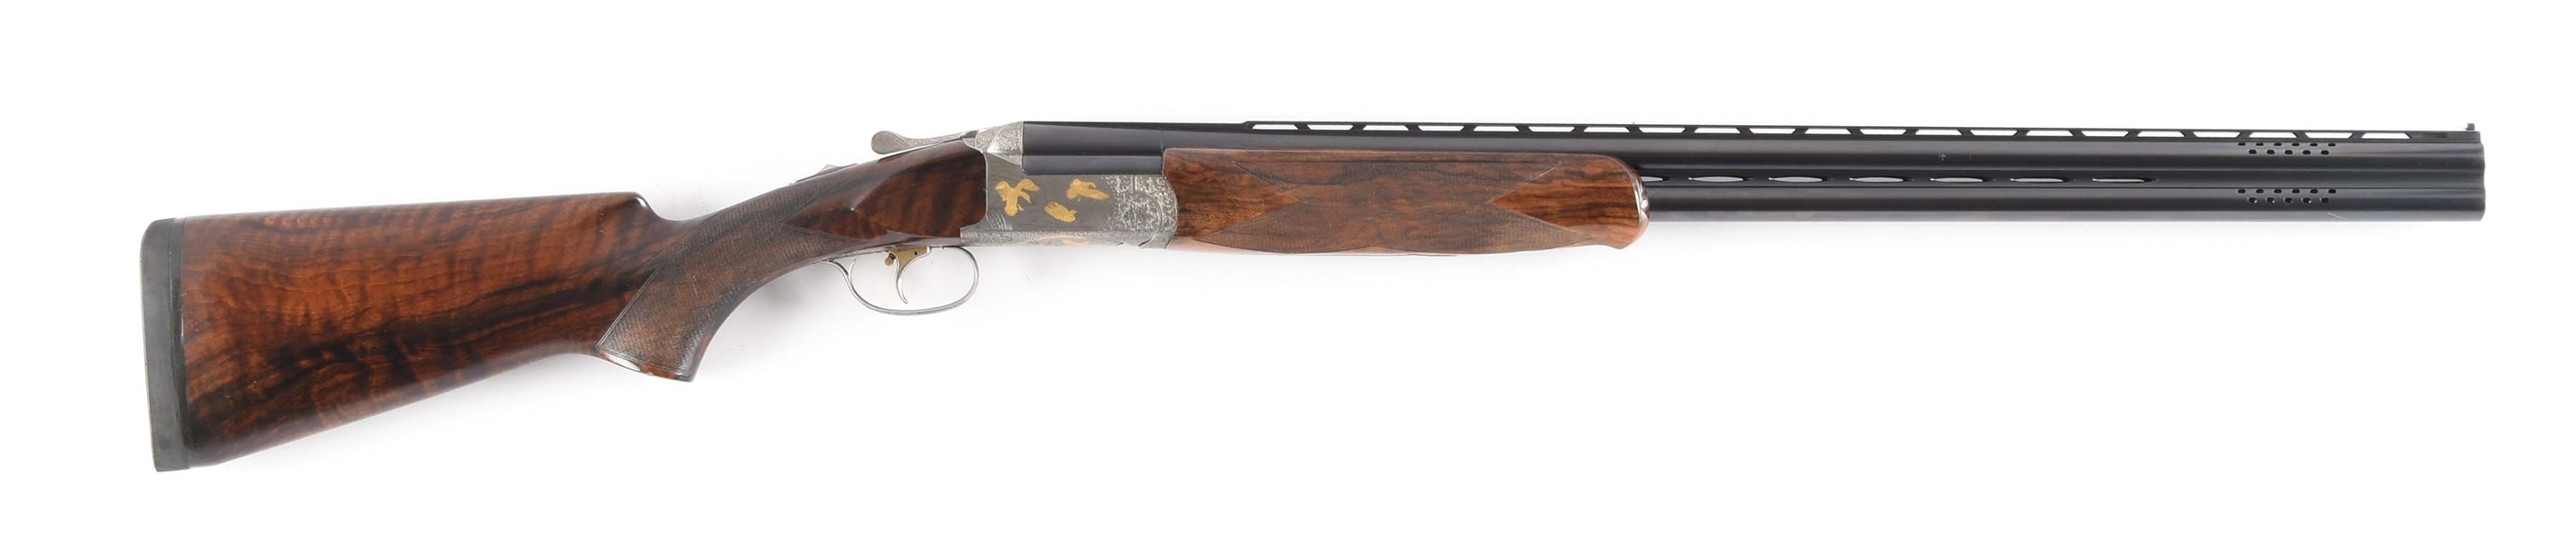 (M) PERAZZI SCO GOLD OVER-UNDER SHOTGUN WITH FLUSH GOLD INLAID GAME SCENES BY FAUSTI AND CASE.